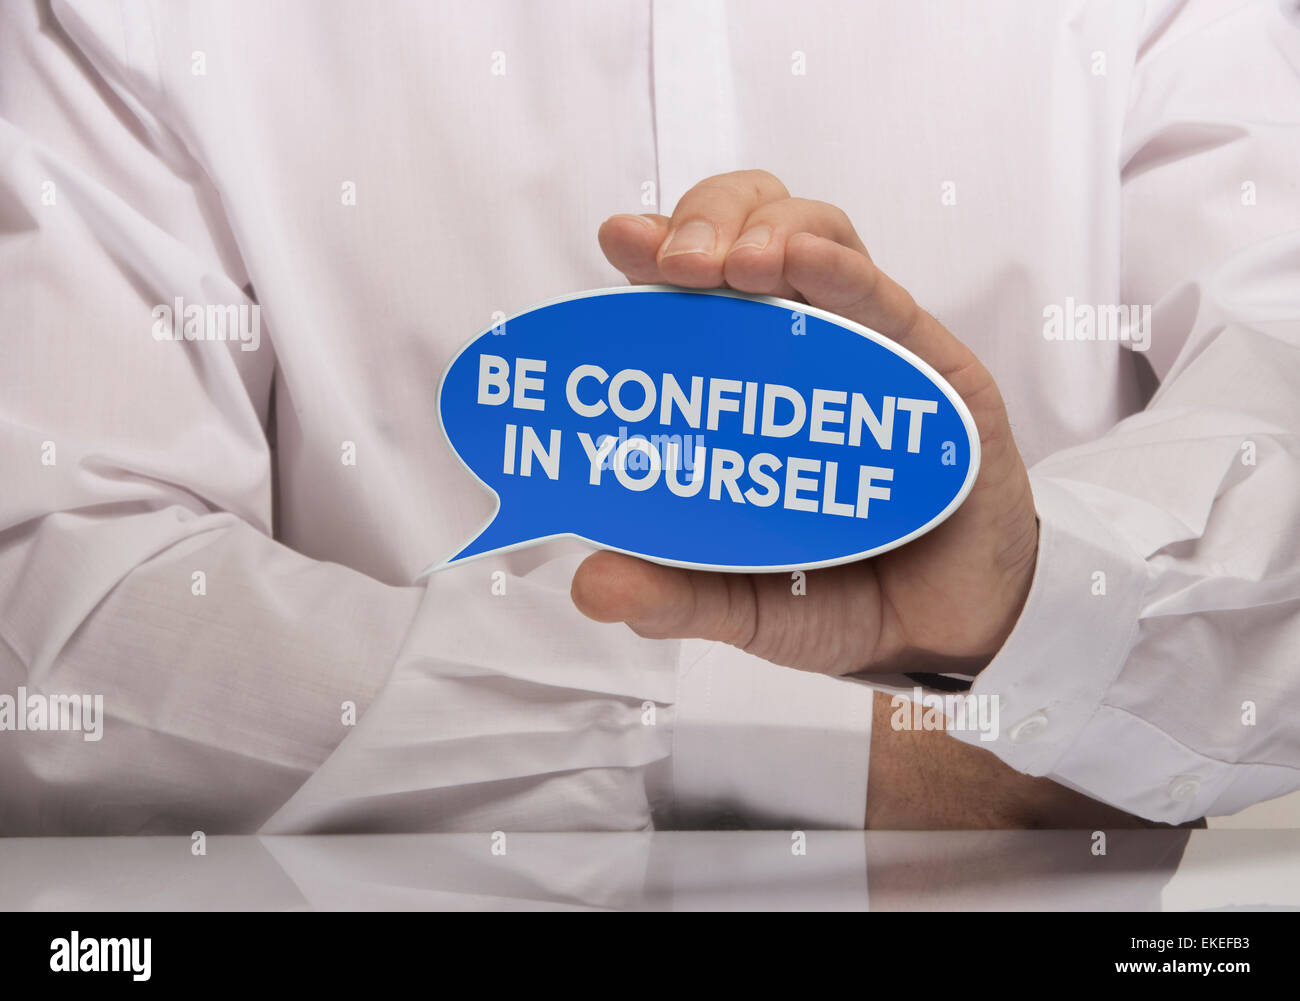 Image of a man hand holding blue speech balloon with the text be confident in yourself, white shirt and reflexion. Concept and m Stock Photo